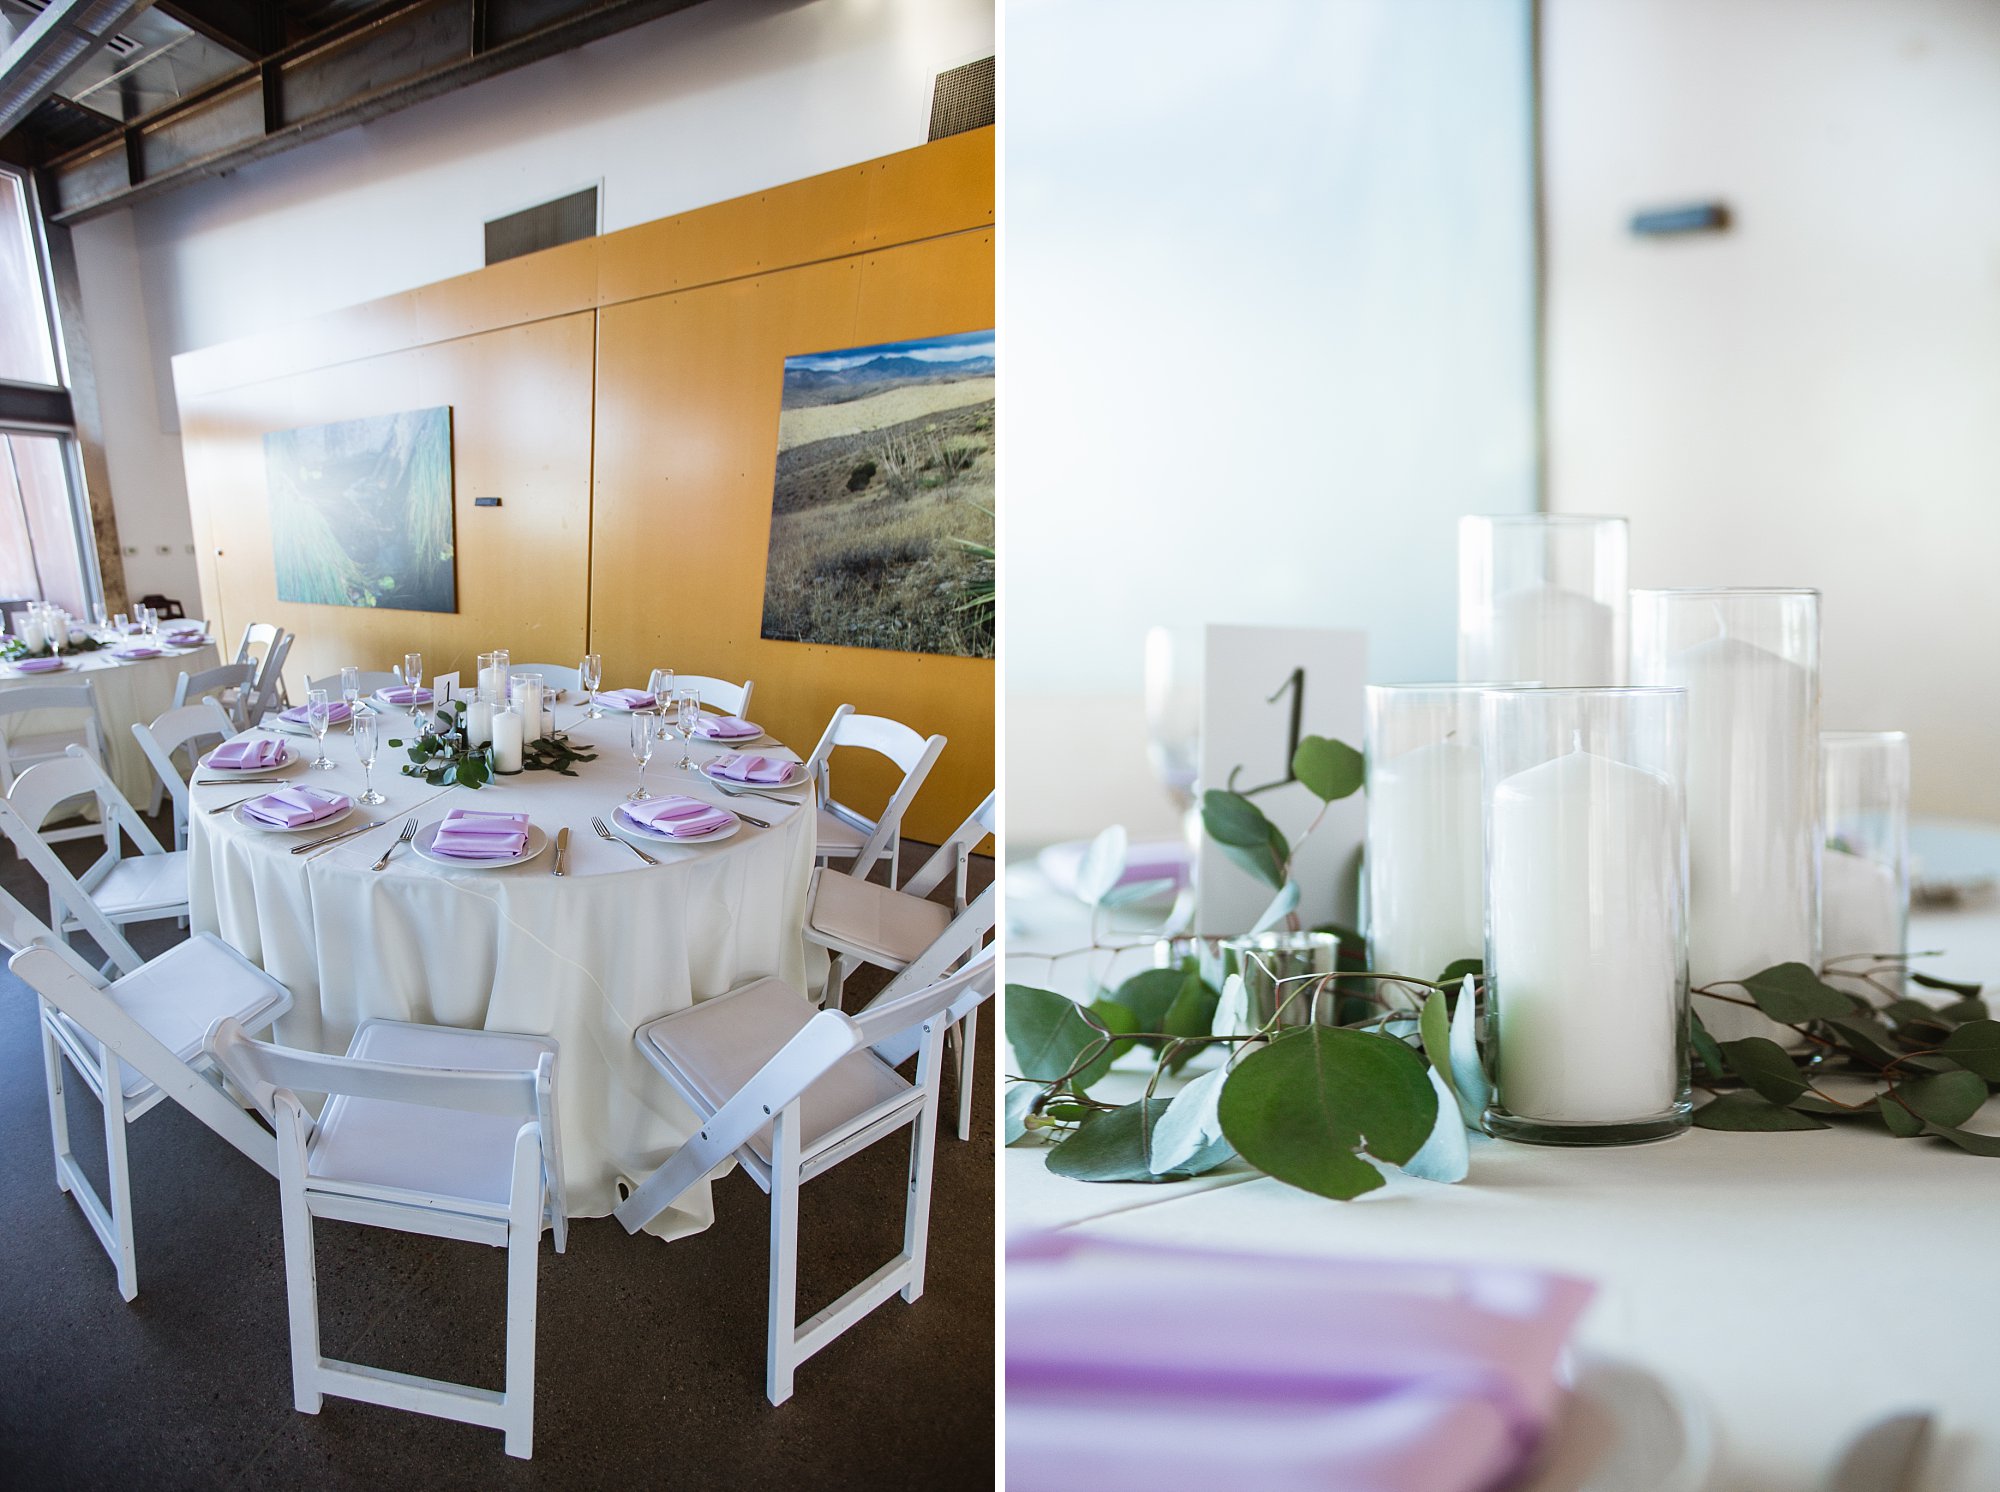 Wedding table and simple candle and eucalyptus centerpiece for a wedding at the Rio Salado Audubon Center in Phoenix Arizona.